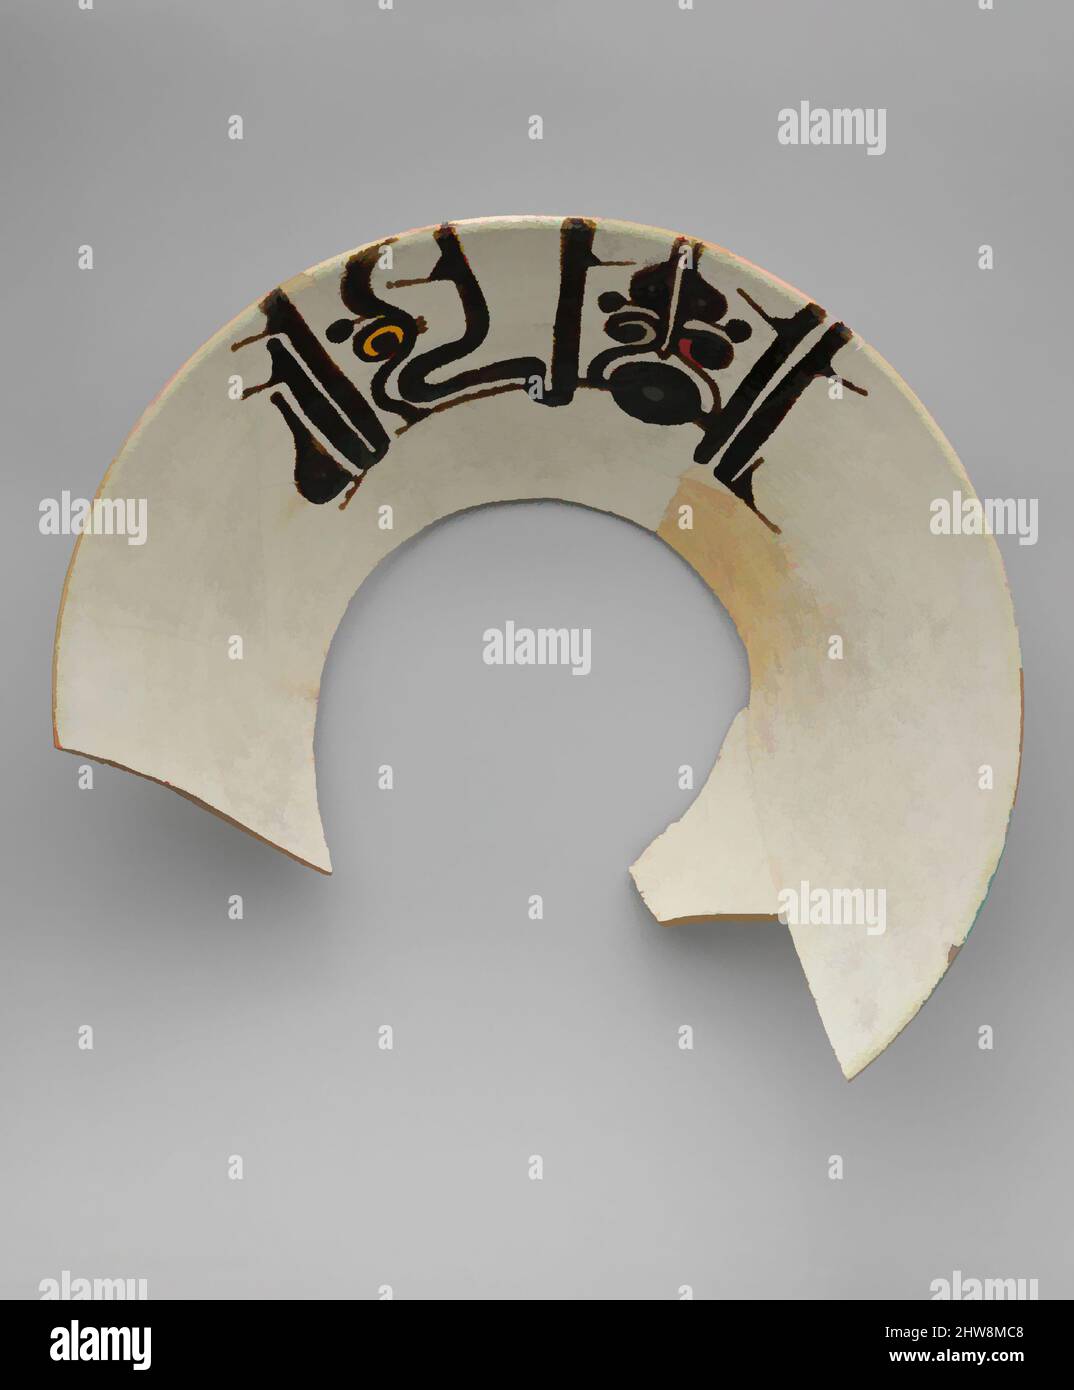 Art inspired by Bowl with Inscription, 'Sovereignty is God's', late 9th–early 10th century, Excavated in Iran, Nishapur, Earthenware; white slip with black slip decoration under transparent glaze, H. 3 3/4 in. (9.5 cm), Ceramics, One of the most common phrases found on Nishapur objects, Classic works modernized by Artotop with a splash of modernity. Shapes, color and value, eye-catching visual impact on art. Emotions through freedom of artworks in a contemporary way. A timeless message pursuing a wildly creative new direction. Artists turning to the digital medium and creating the Artotop NFT Stock Photo